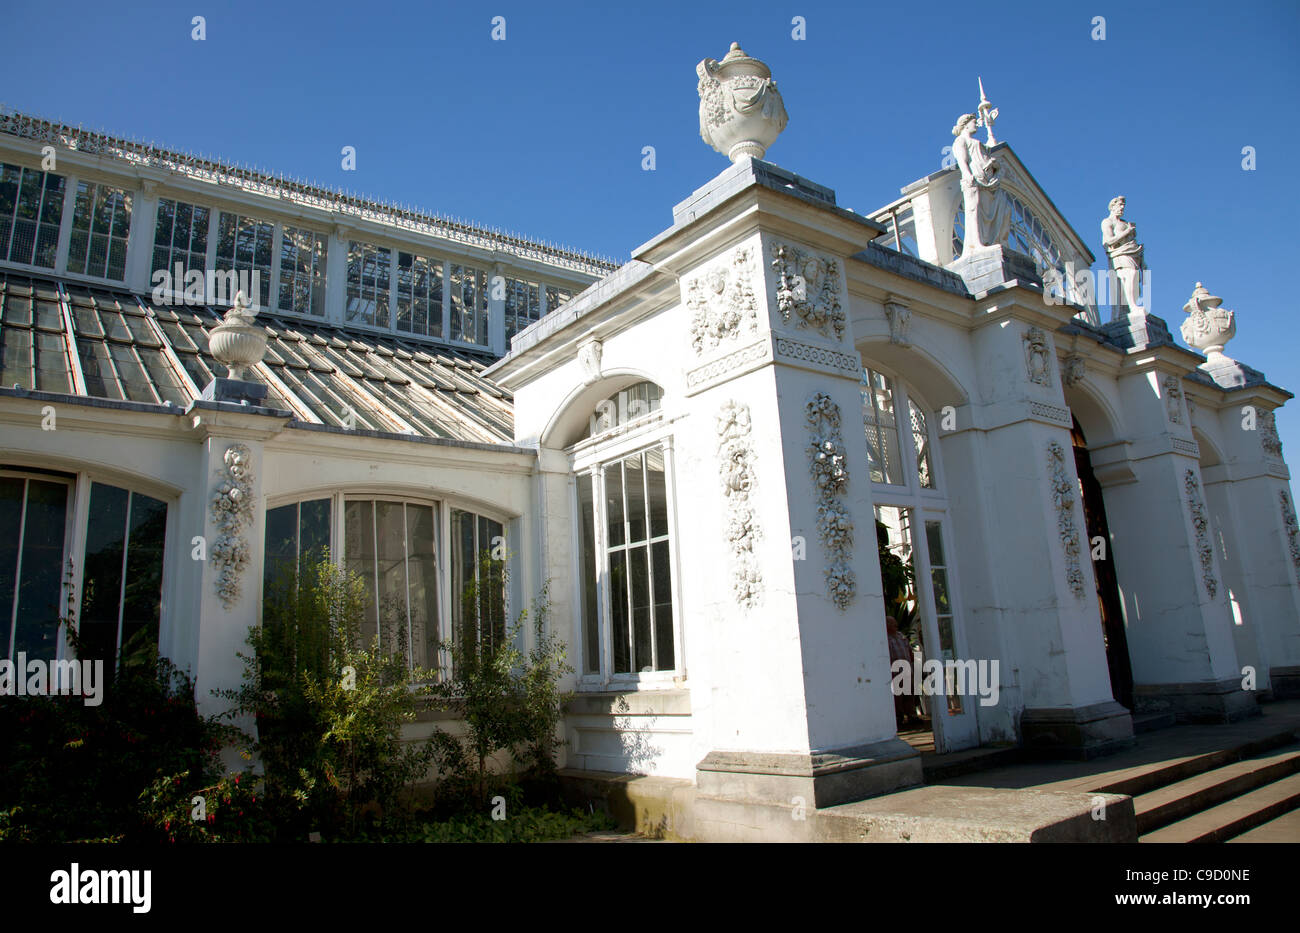 Temperate House Building at Kew Gardens - London Stock Photo